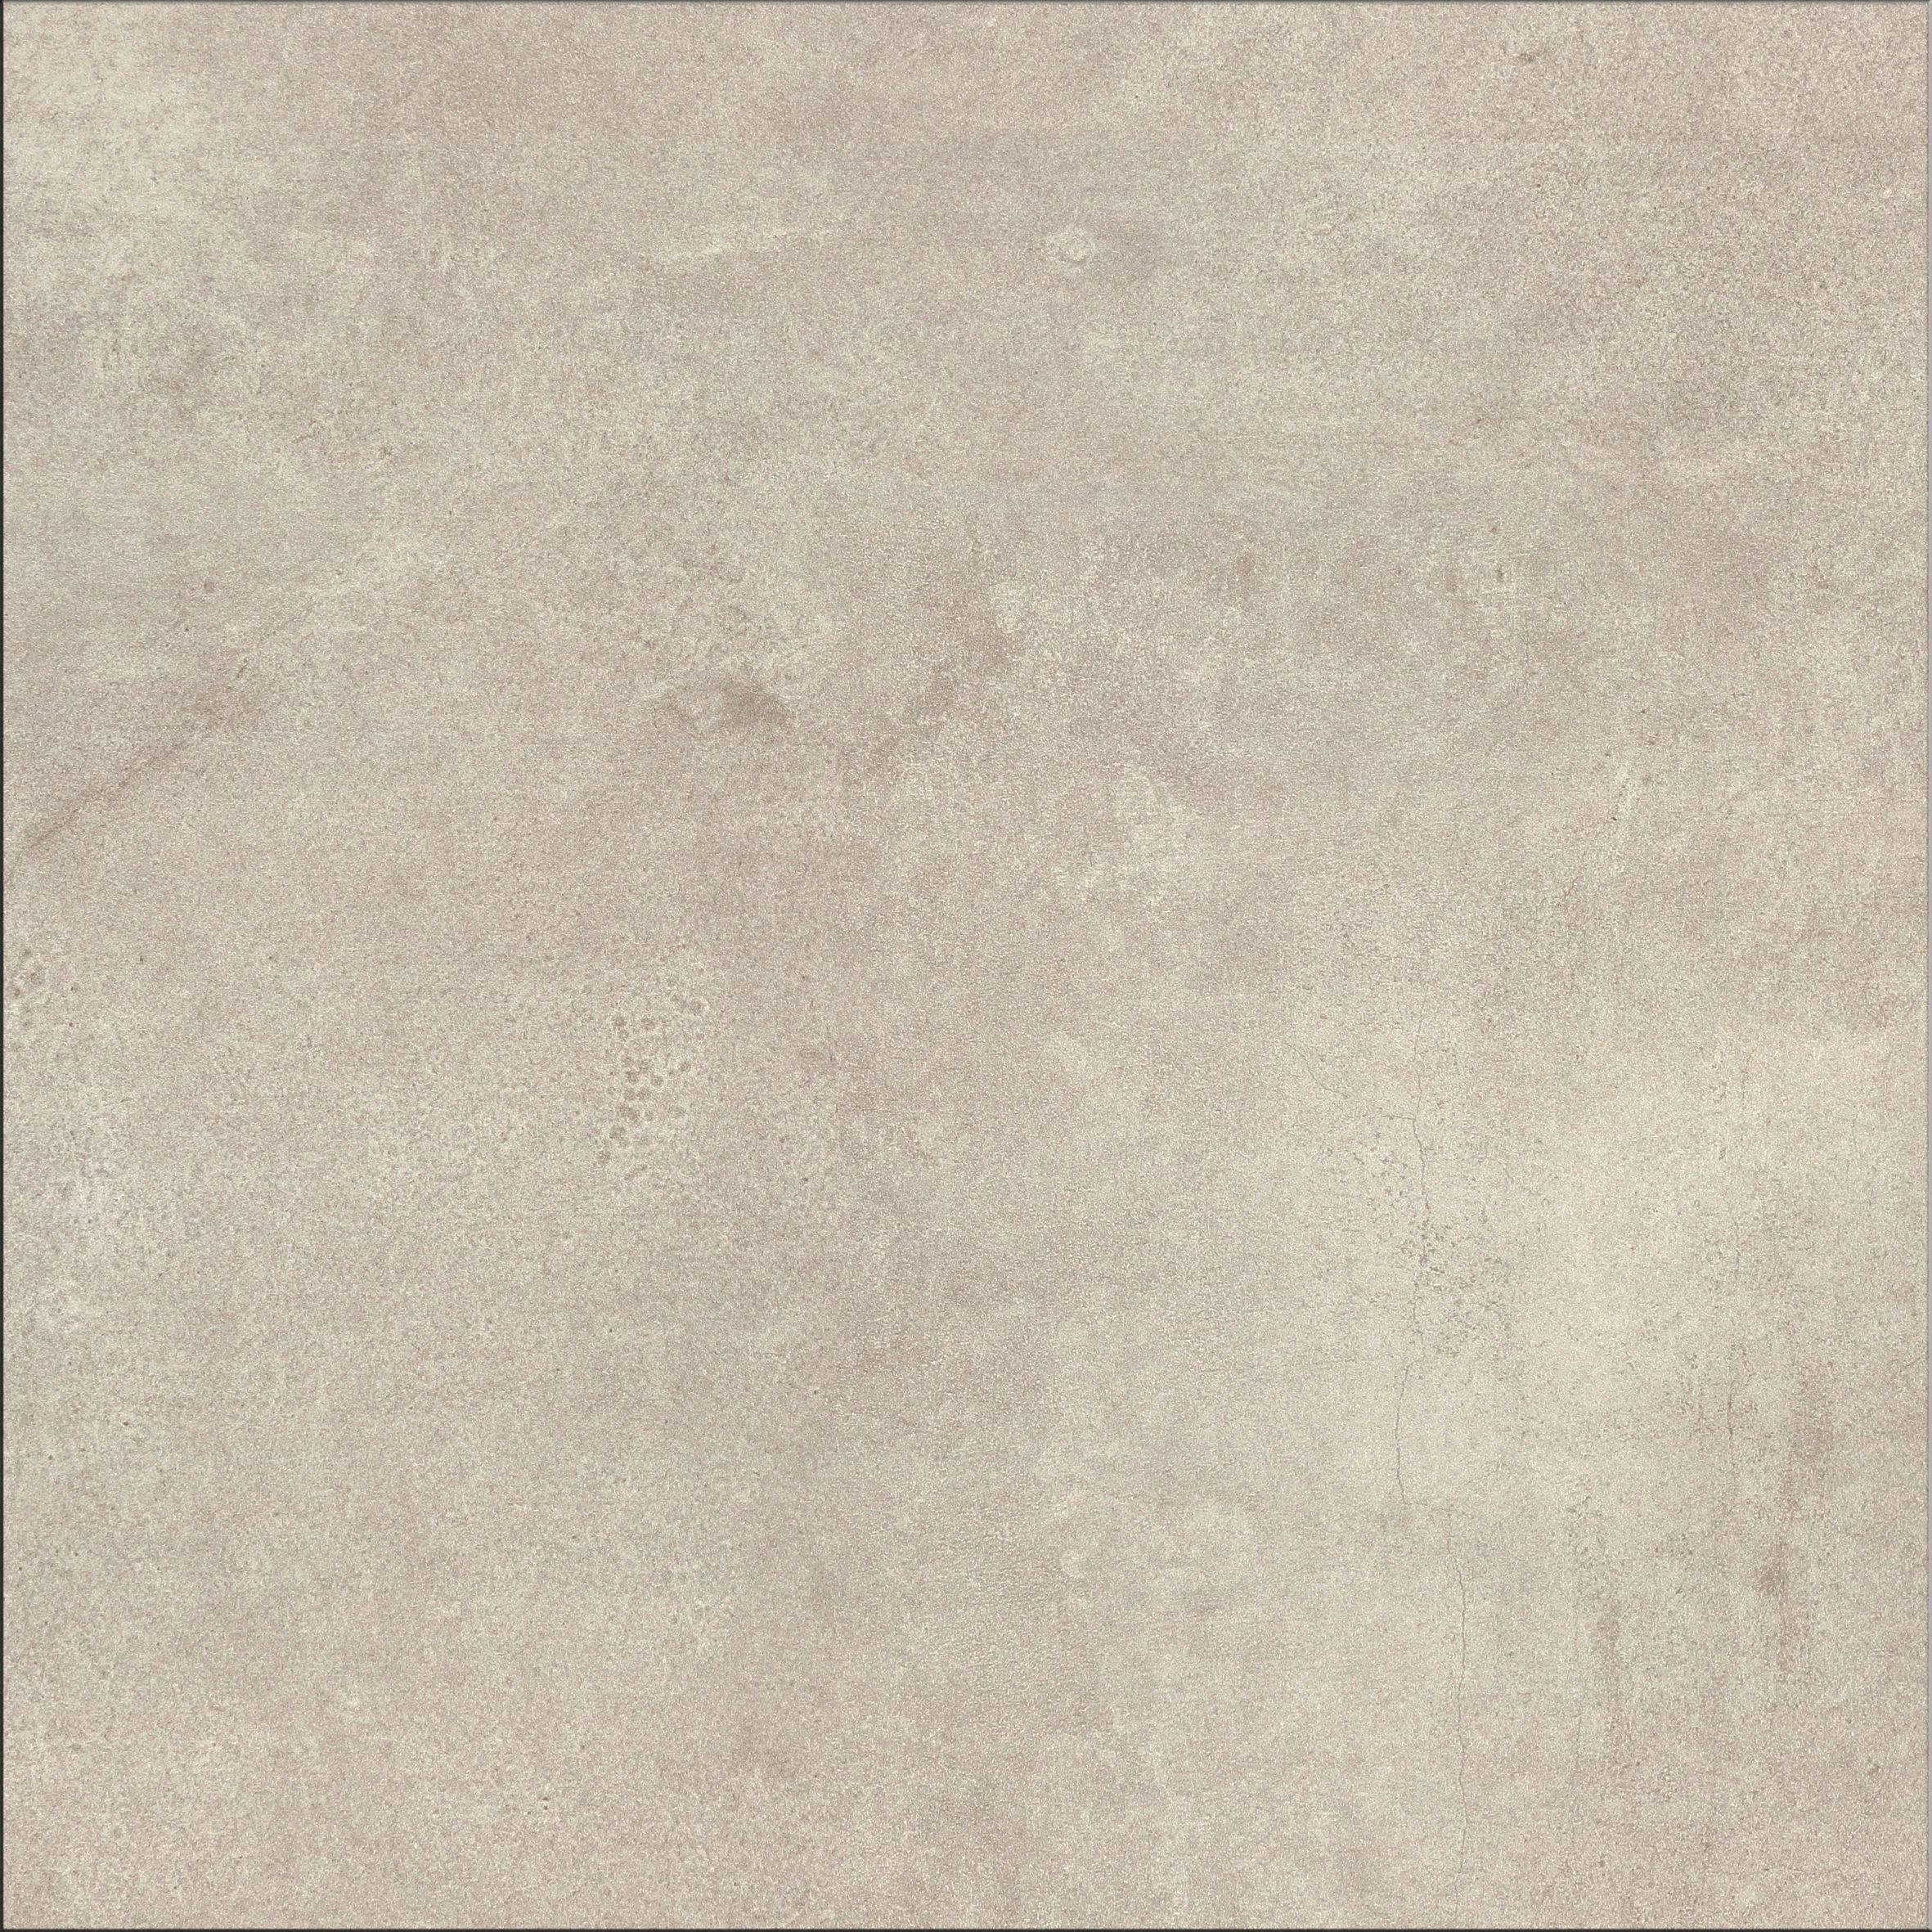 Cheapest Ceramic with Price Grey Porcelain Bathroom Wall Tile Rustic Floor Tile 600x600mm